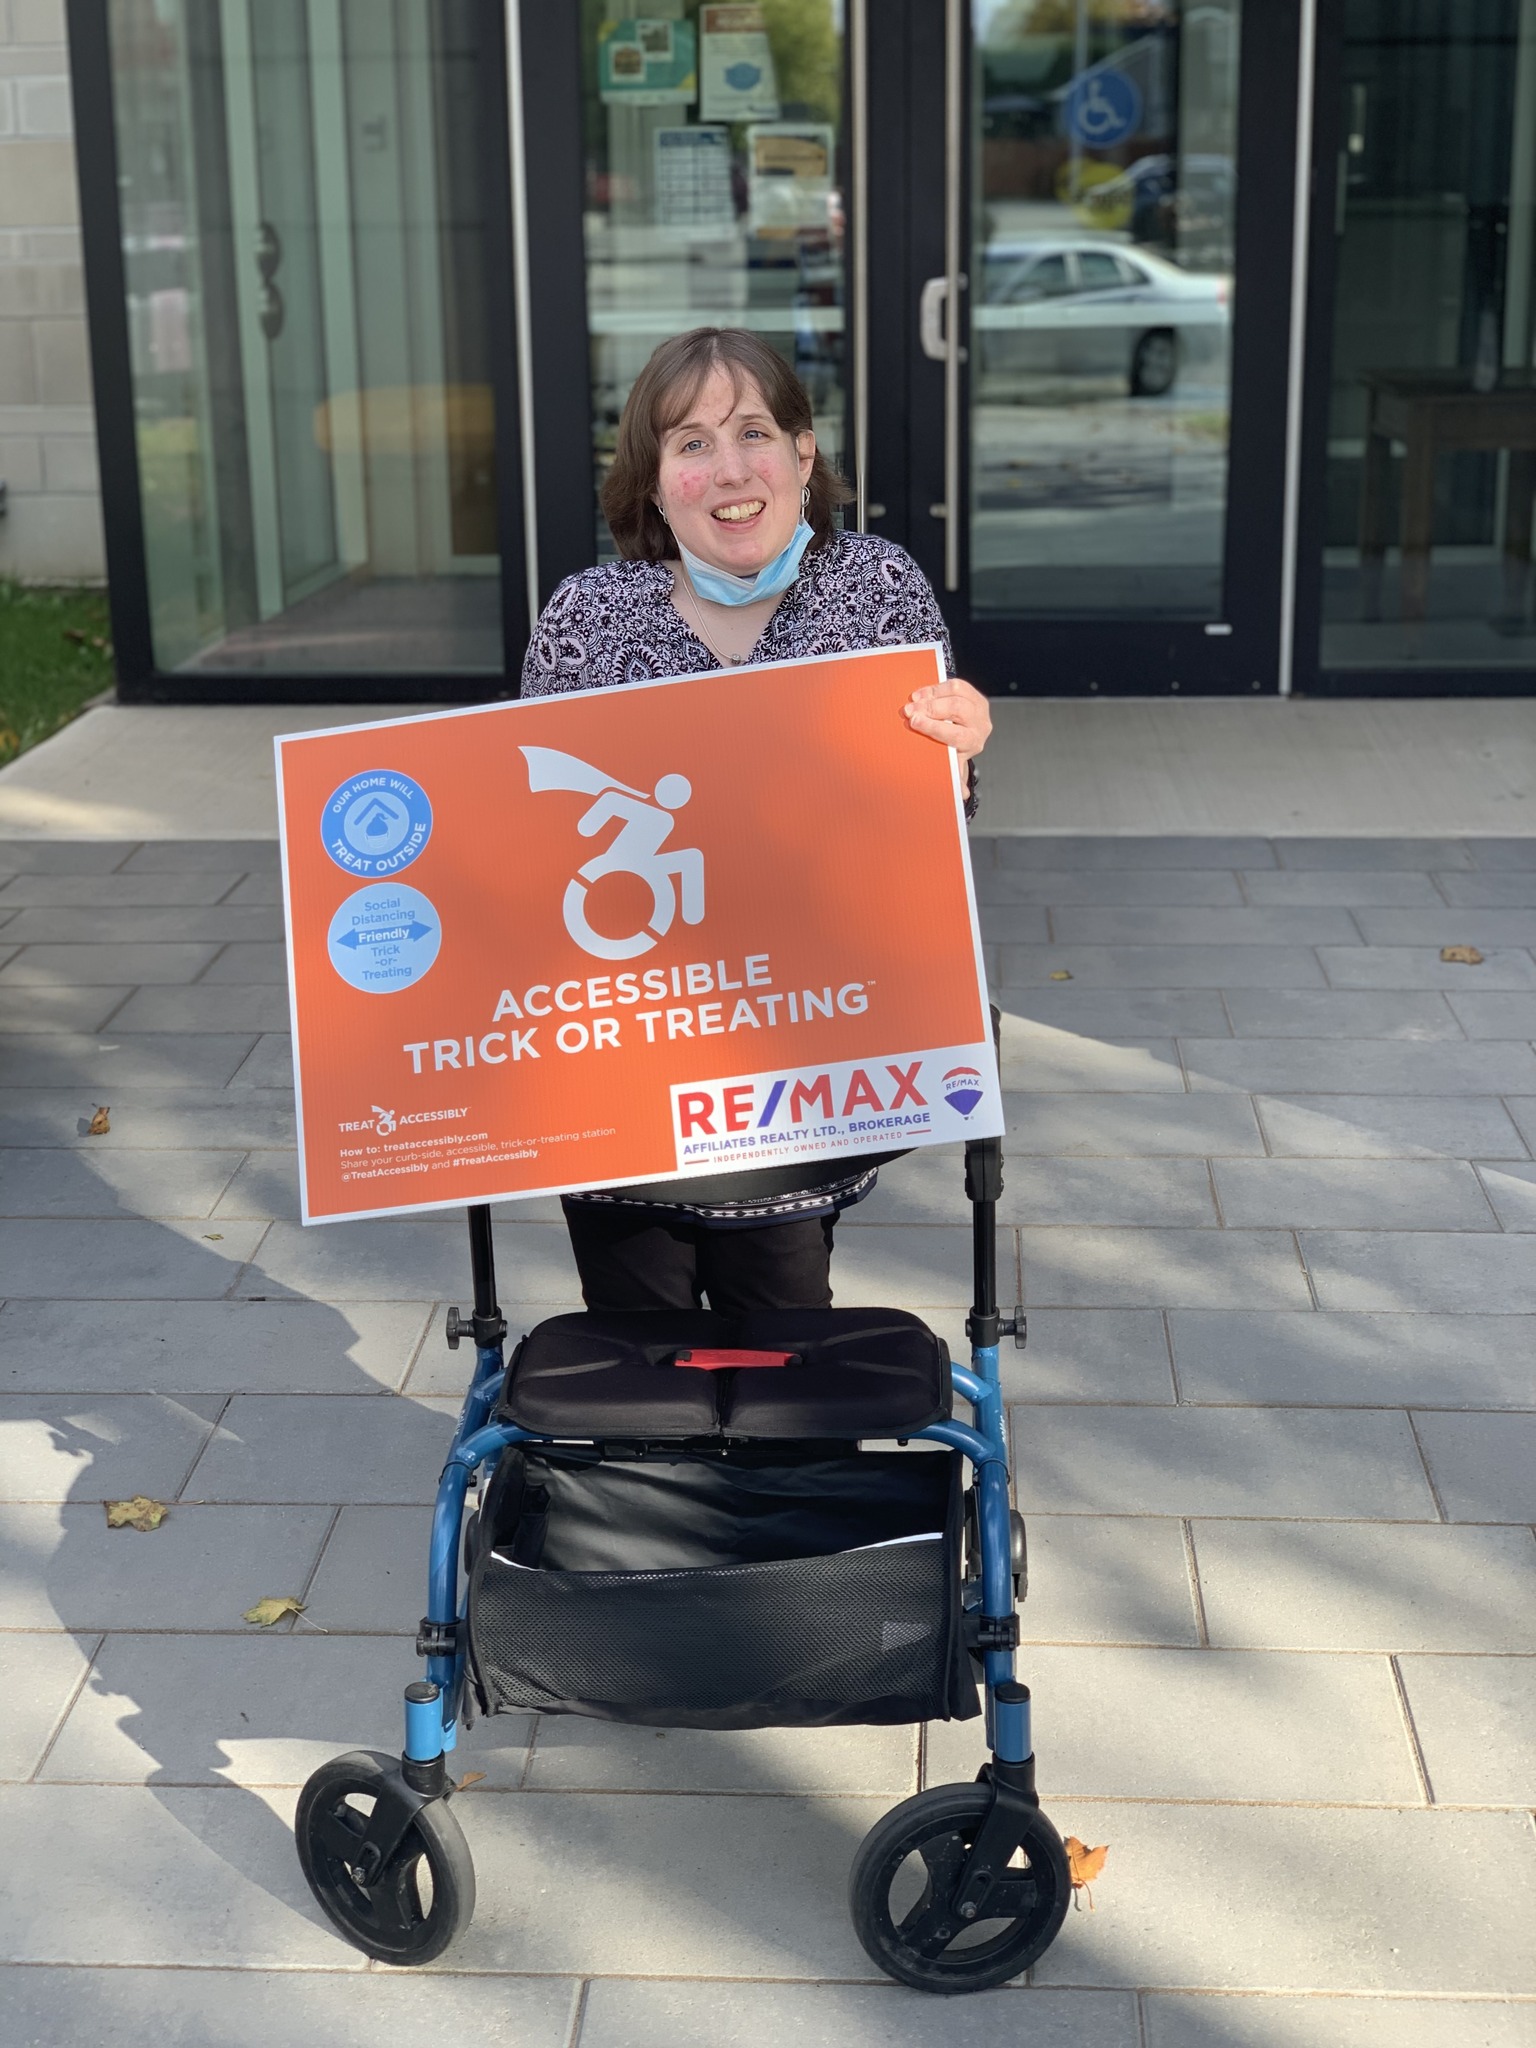 Chair of Accessibility Advisory Committee holding an accessible trick or treat sign